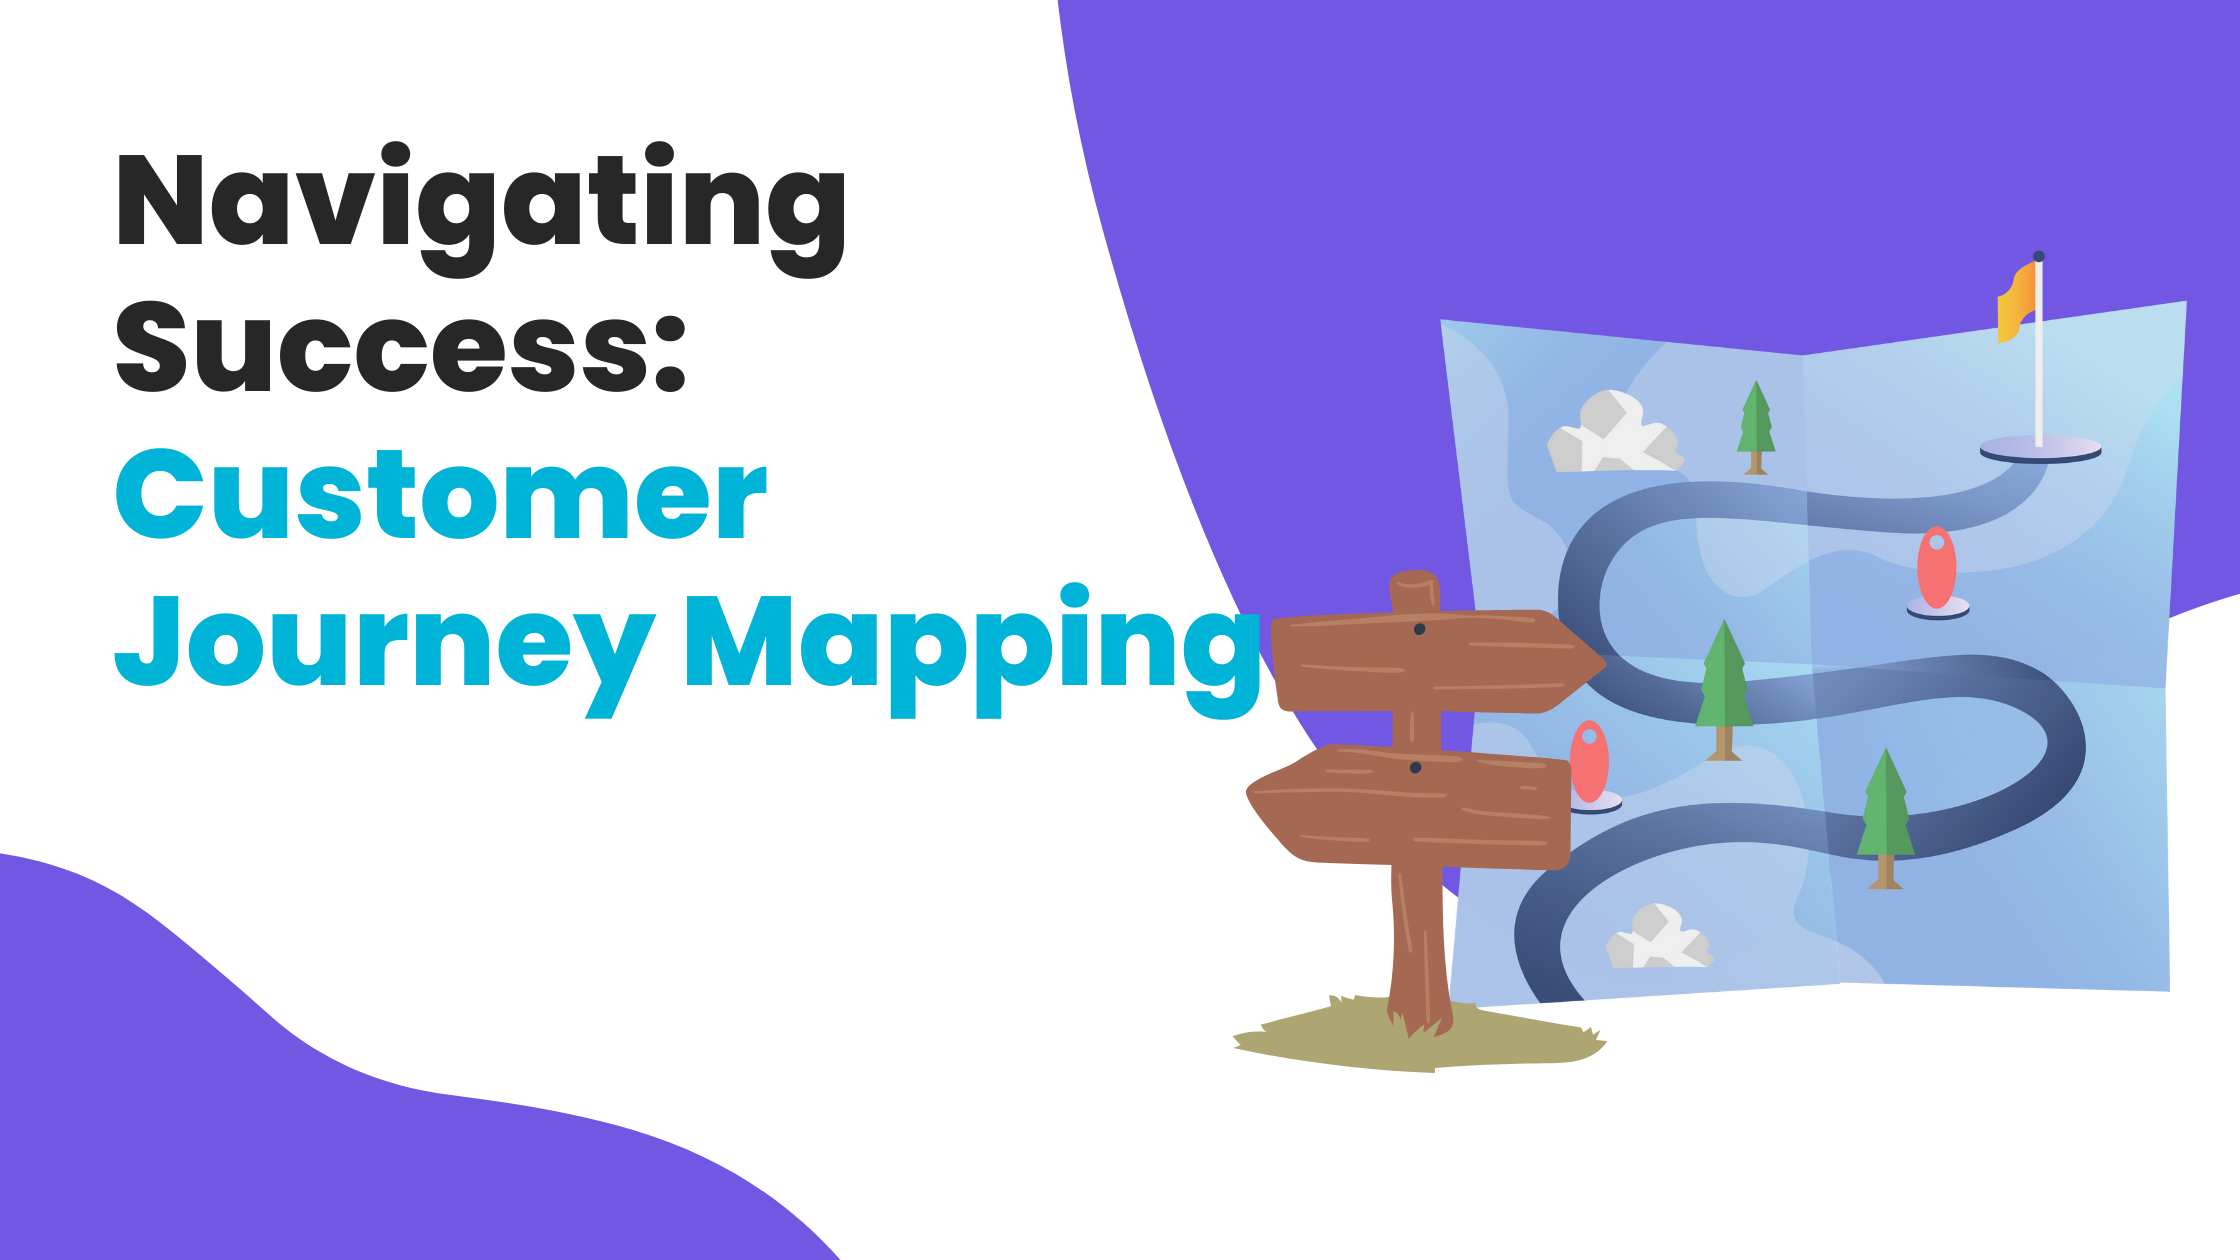 Navigating Success: Customer Journey Mapping